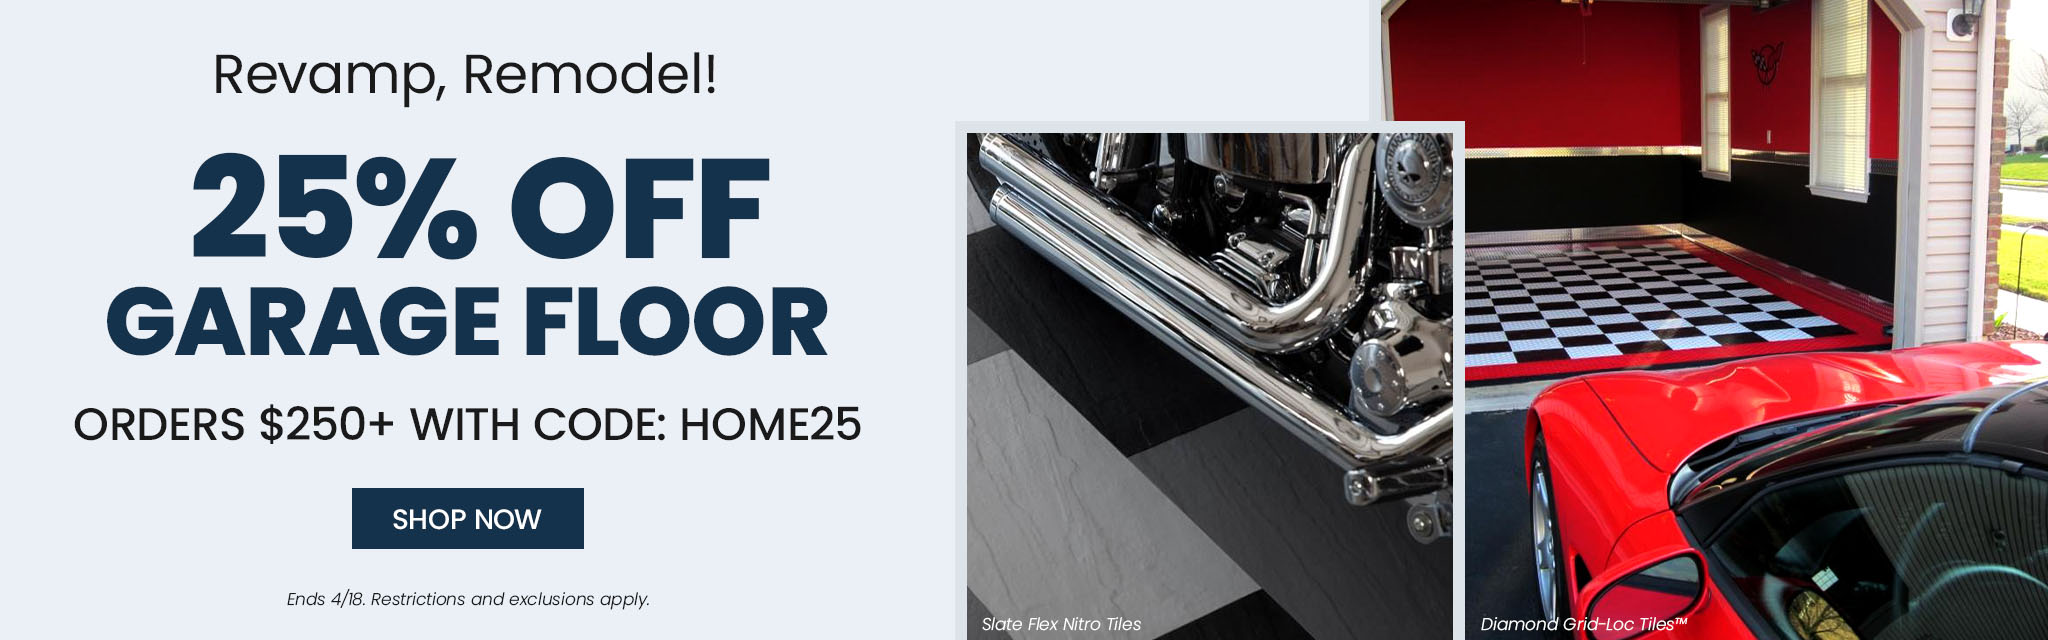 Revamp, Remodel! 25% Off Garage Floor Orders $250+ | Code: HOME25 | Shop Now | *Ends 4/18. Restrictions and exclusions apply. 